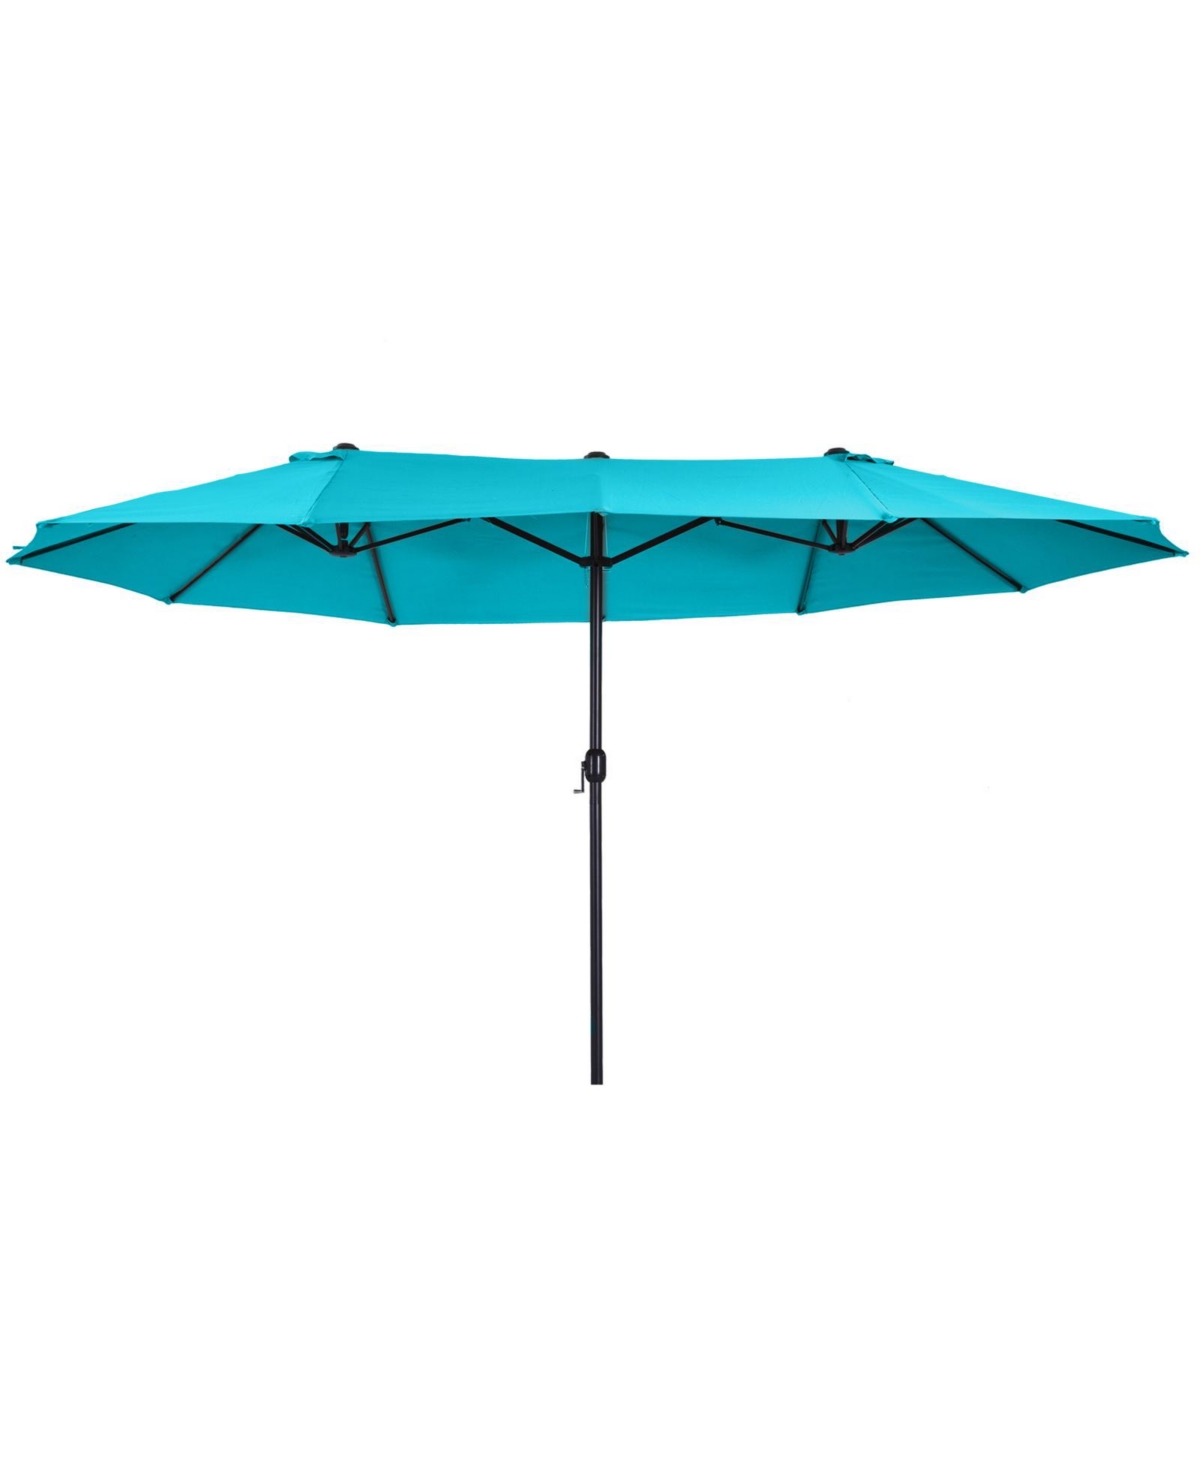 15ft Patio Umbrella Double-Sided Outdoor Market Extra Large Umbrella with Crank Handle for Deck, Lawn, Backyard and Pool, Blue - Blue